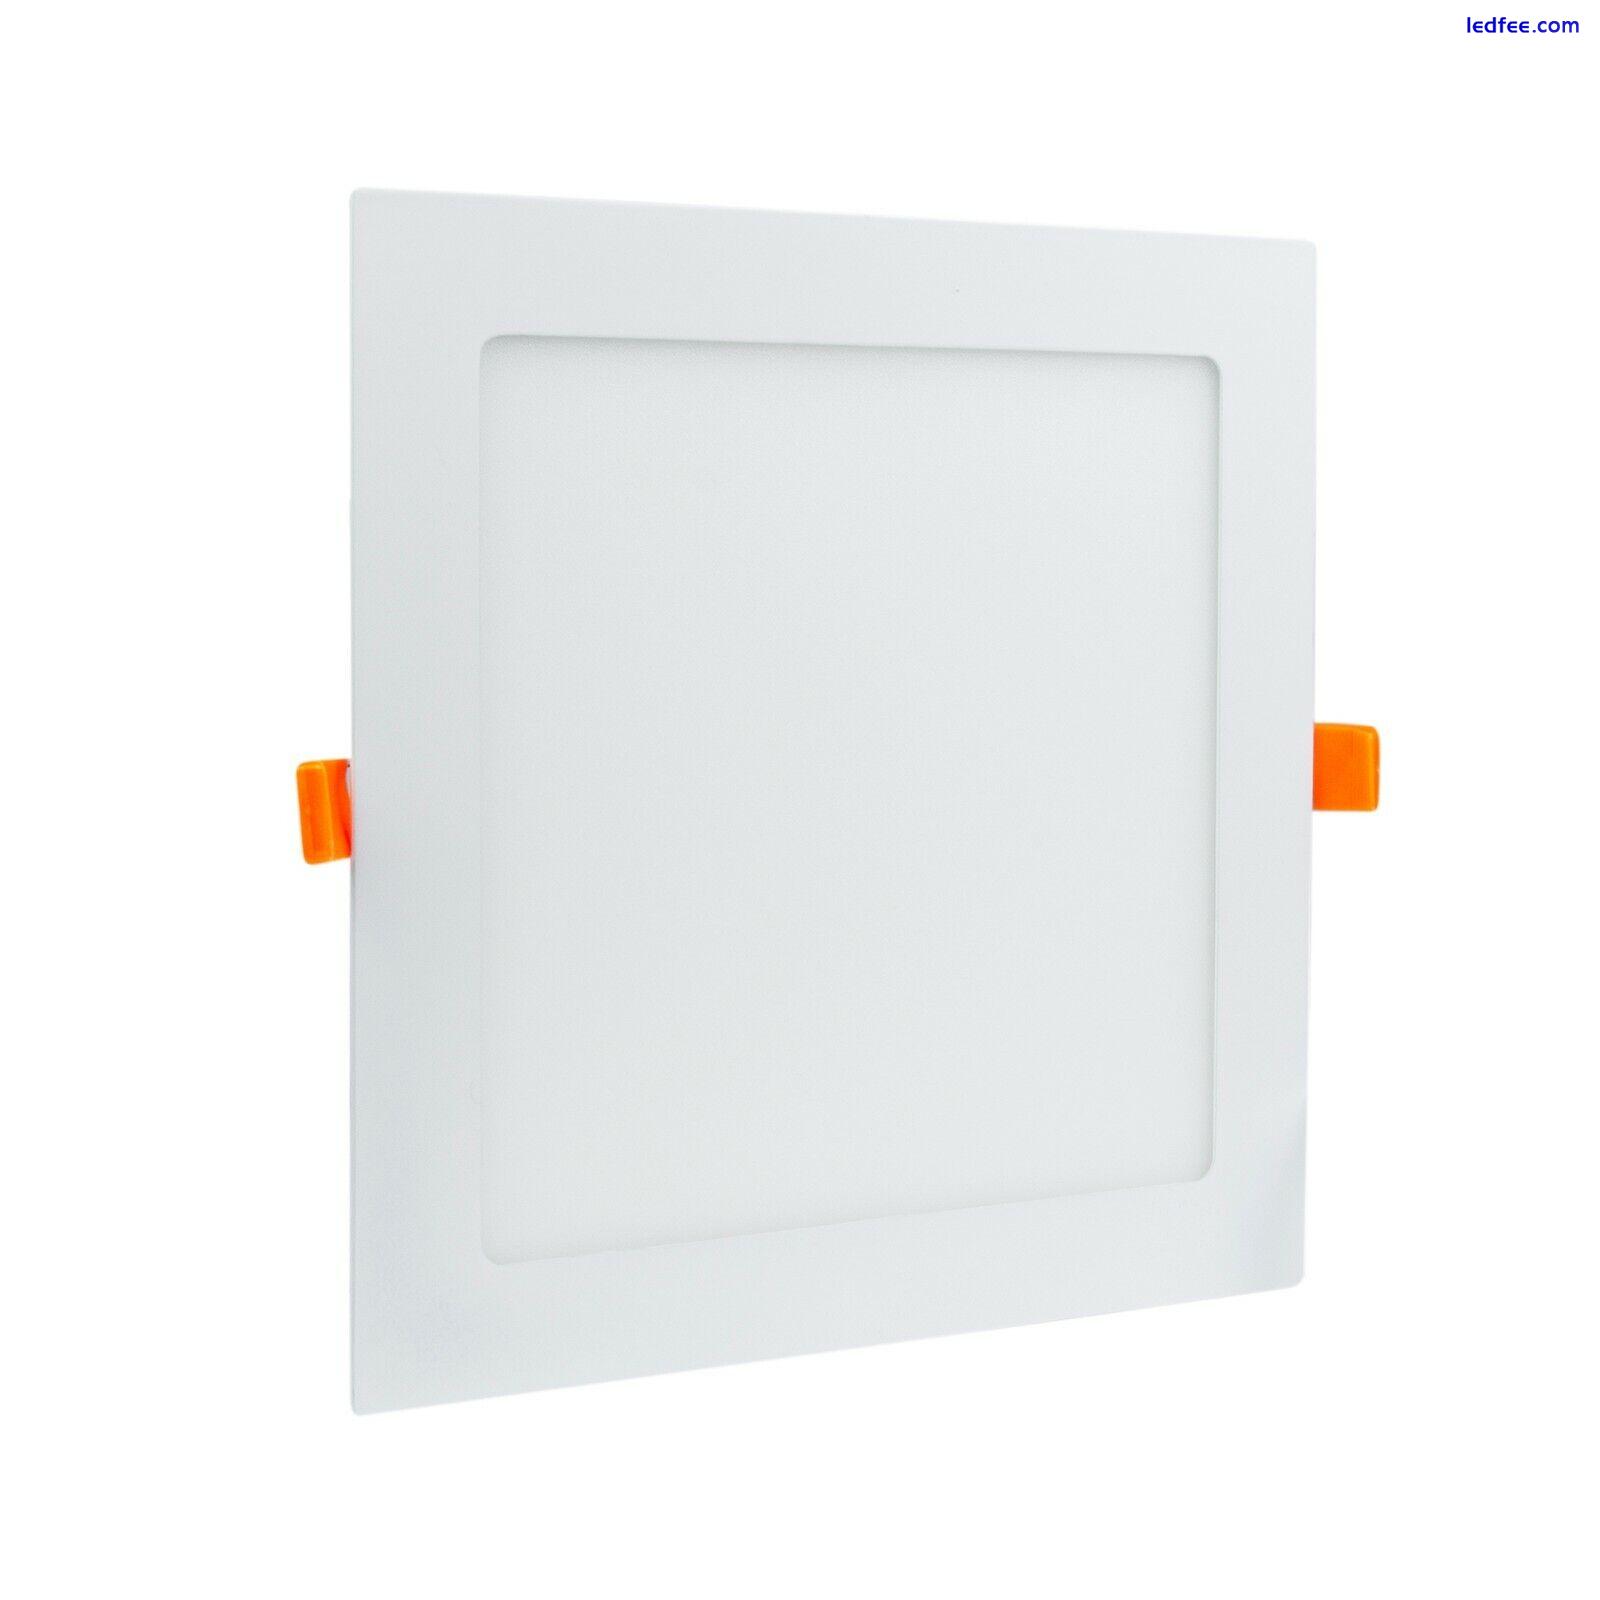 LED Recessed Light Panel Ceiling Down Light Ultra Slim Round & Square Flat Panel 5 